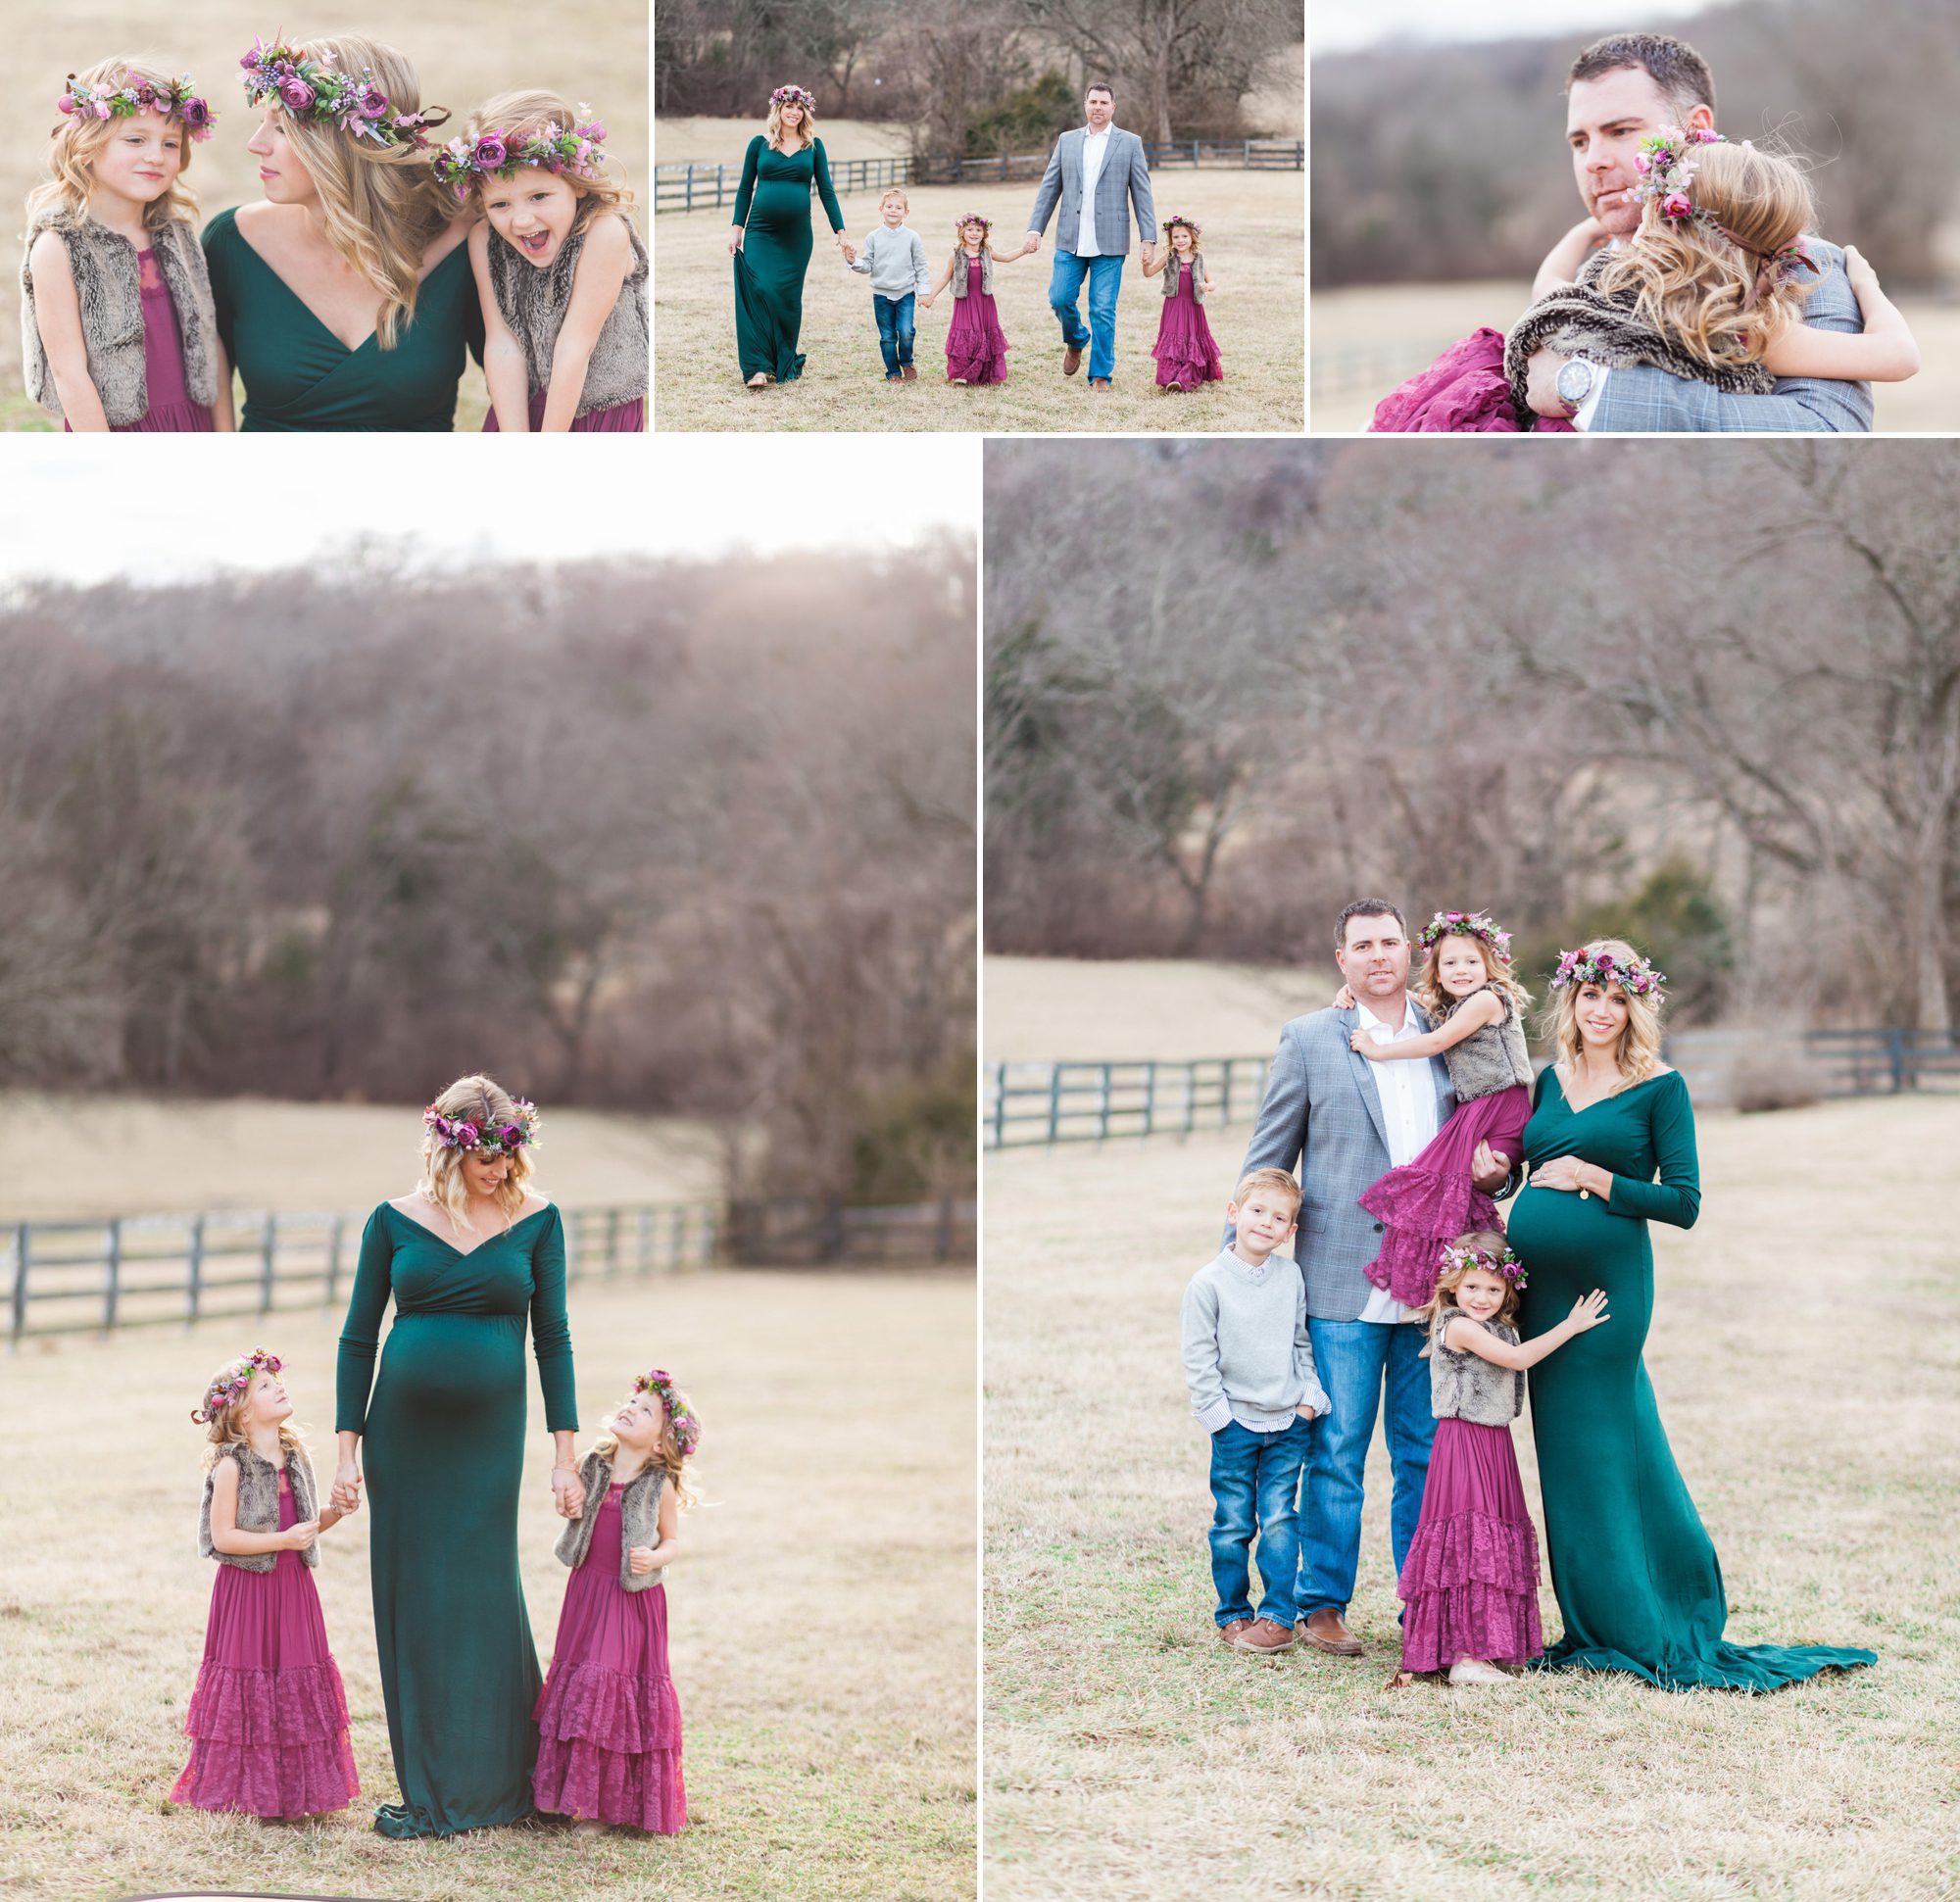 Winter Family Maternity Photo Session in Brentwood, TN. Photo by Krista Lee Photography Nashville TN